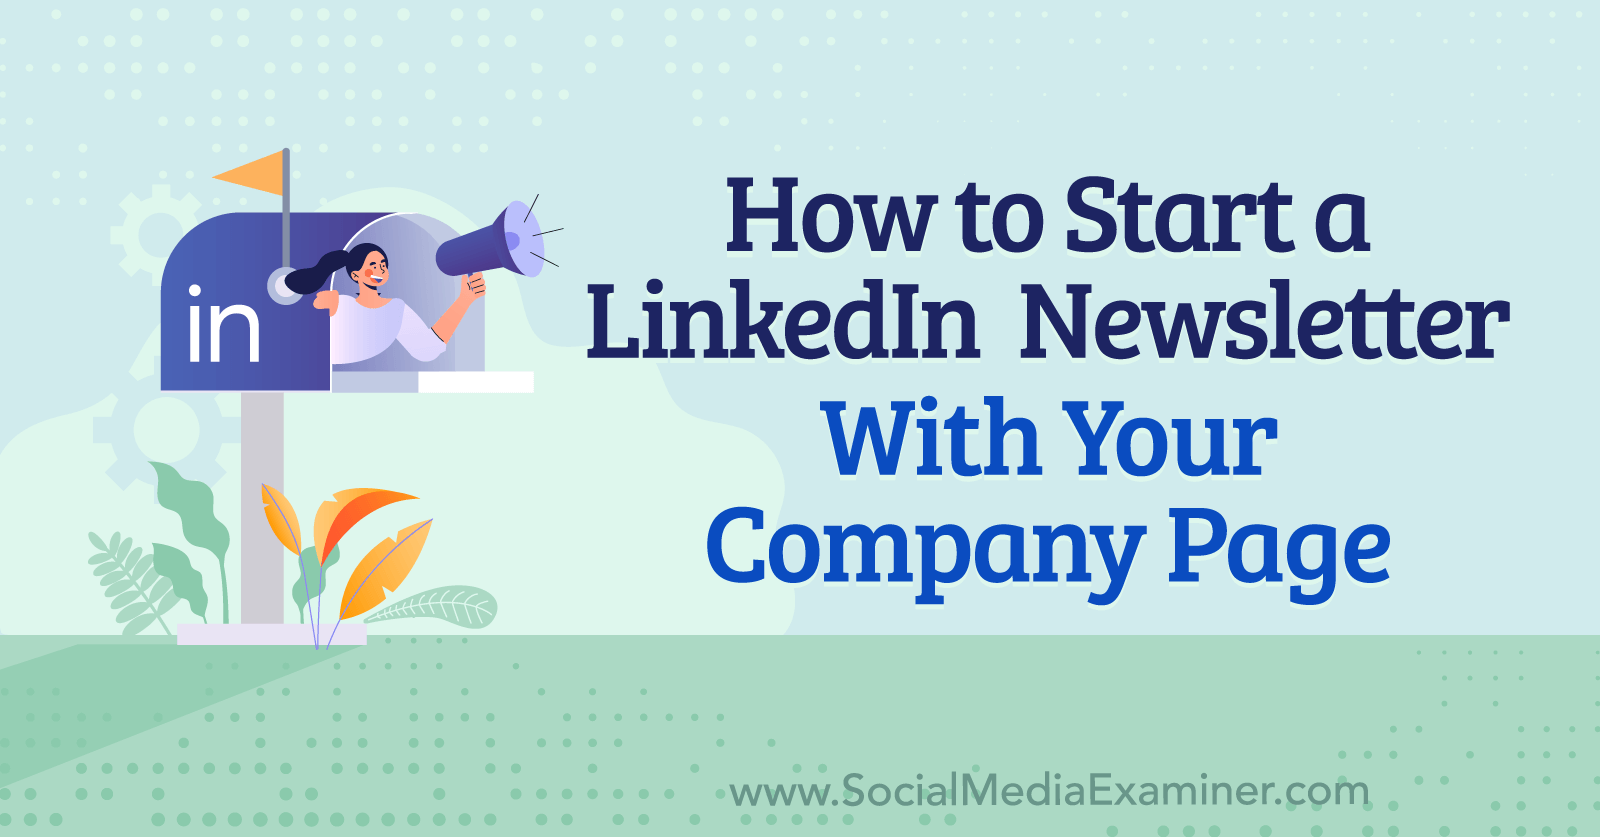 How to Start a LinkedIn Newsletter With Your Company Page by Anna Sonnenberg on Social Media Examiner.